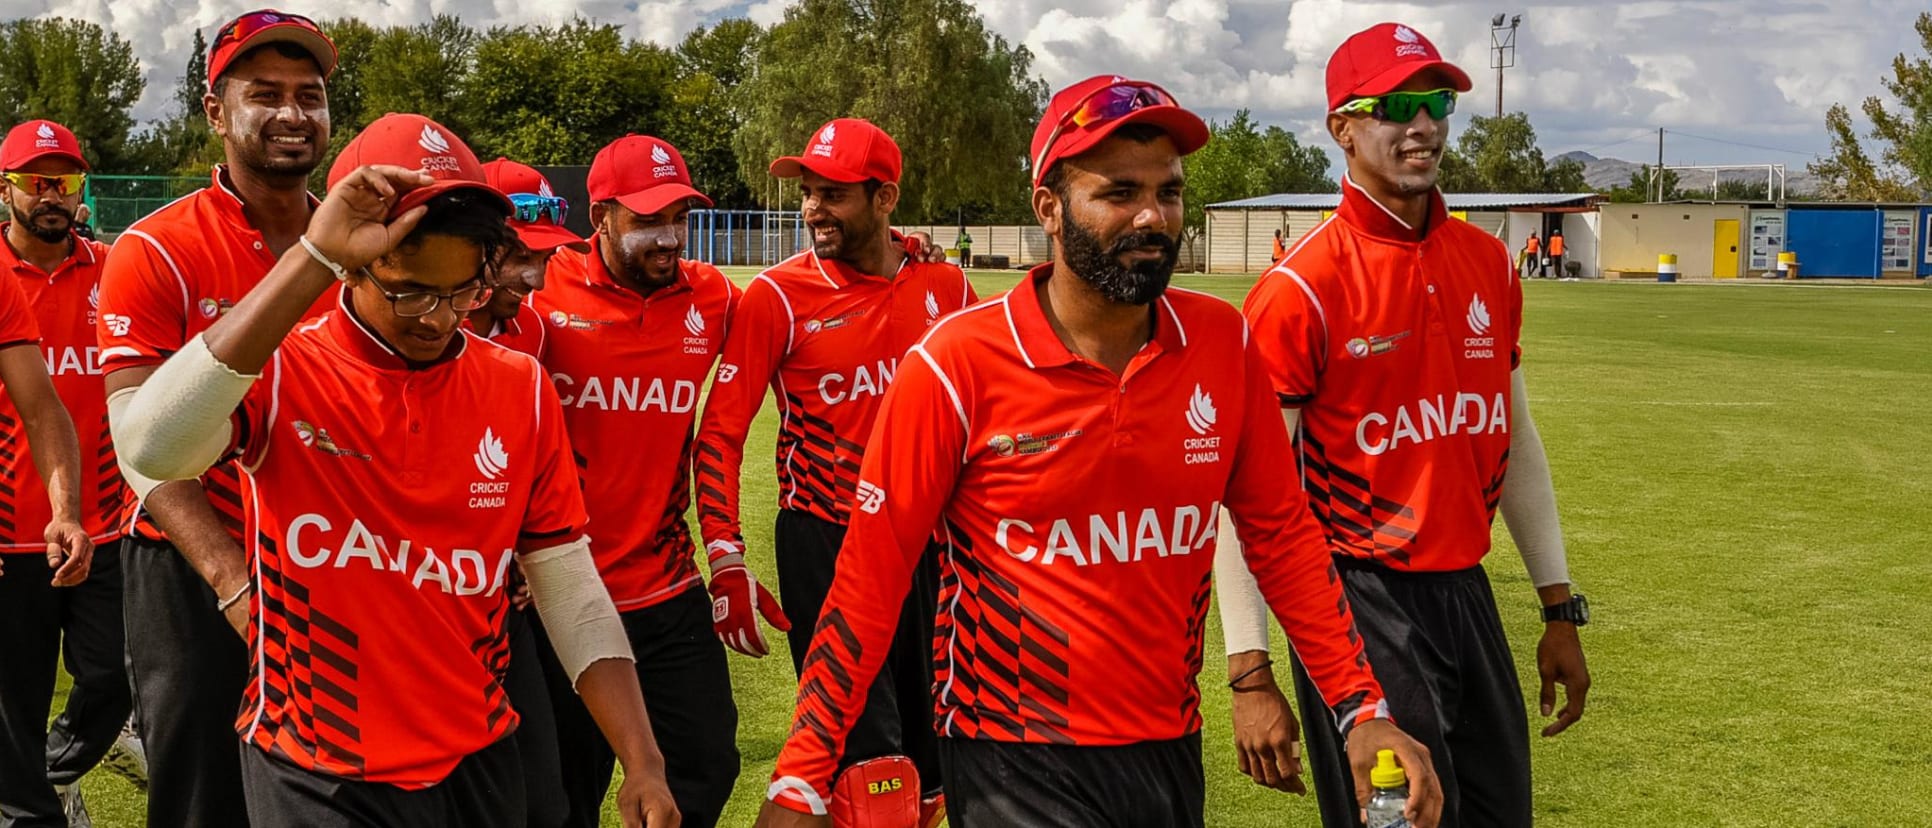 Led by Navneet Dhaliwal (3/15) and Saad Zafar (3/30), Canada recorded their third win of the tournament in as many games to consolidate their position at the top of the table